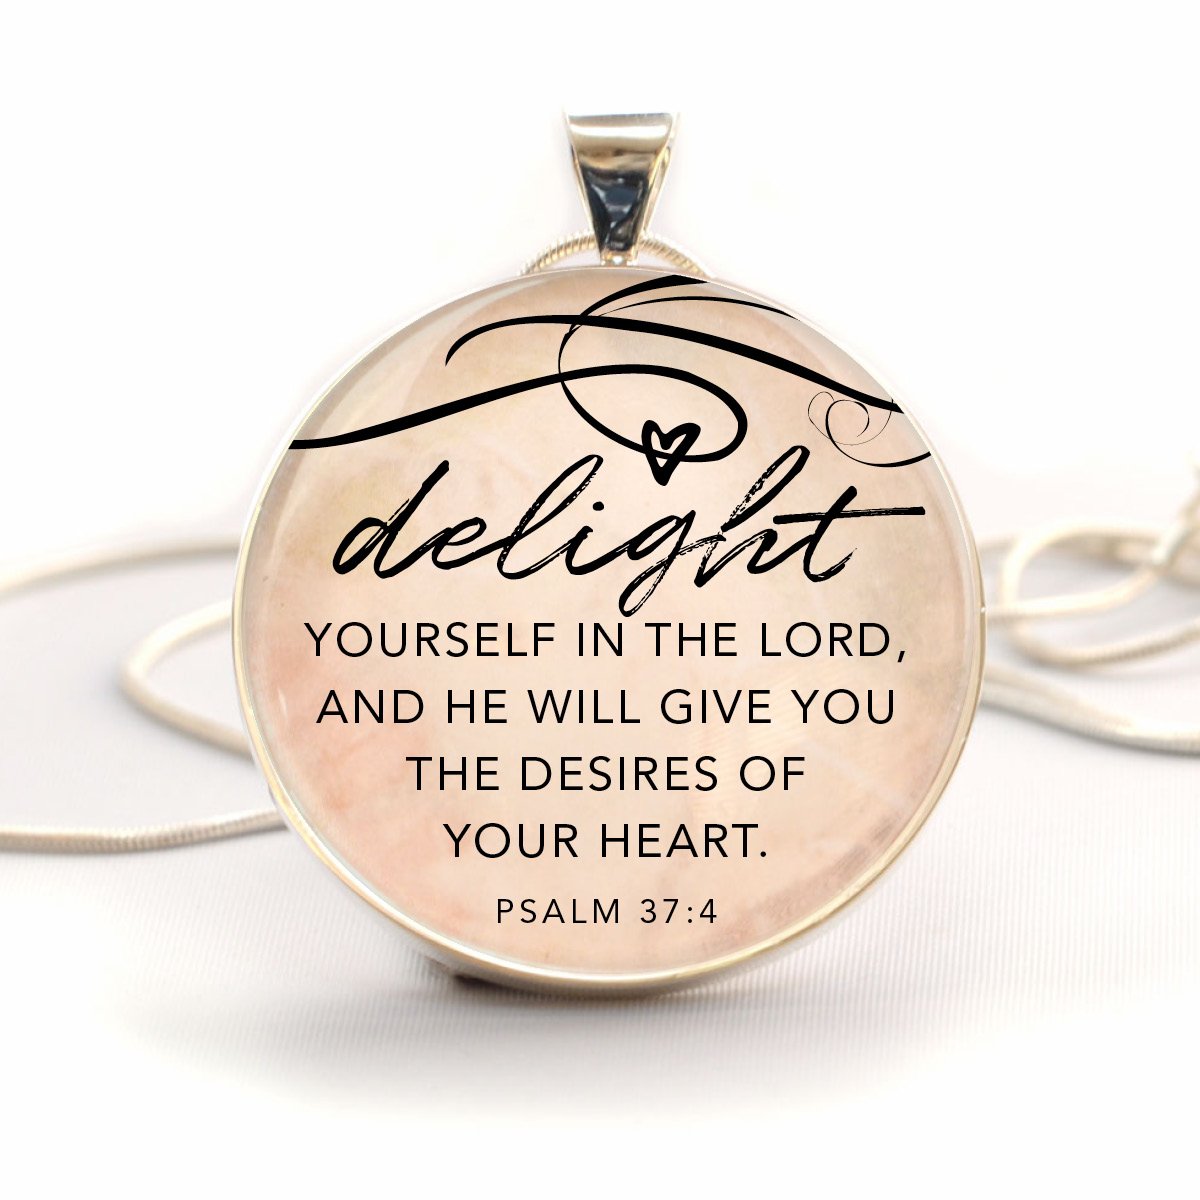 Delight Yourself in the Lord Necklace - Psalm 37:4, Psalms, Silver-Plated Bijou Her